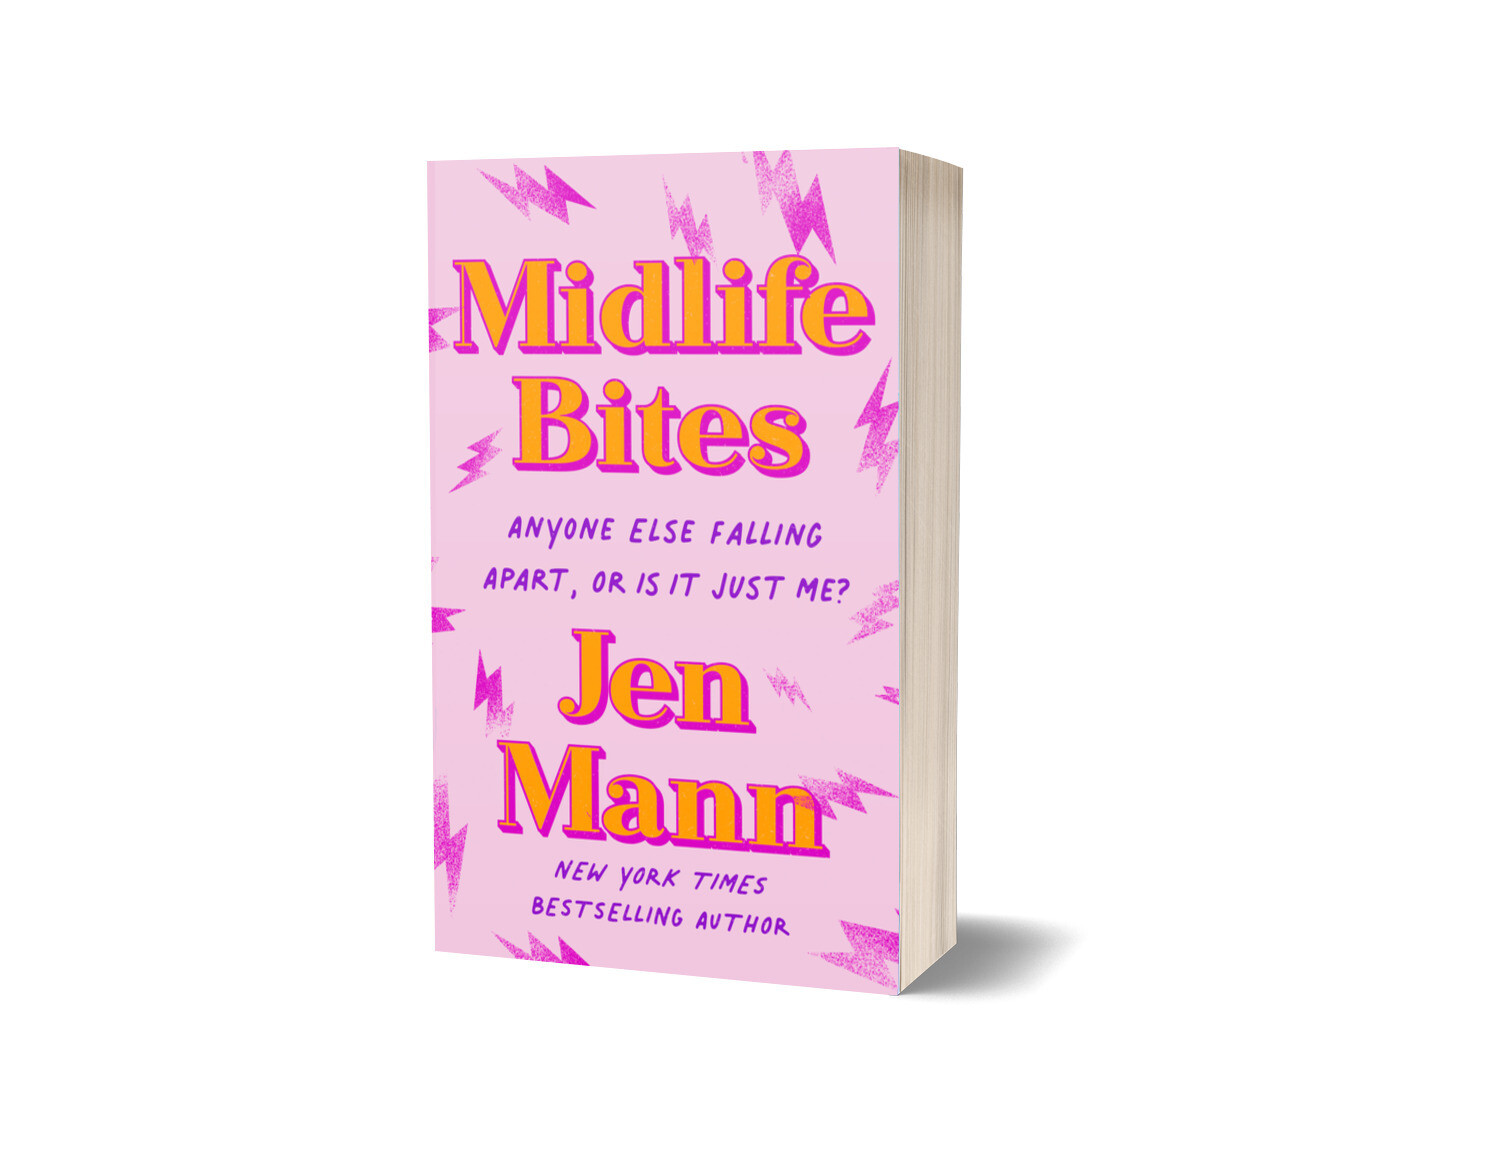 Midlife Bites: Anyone Else Falling Apart, Or Is It Just Me? - Signed Copy